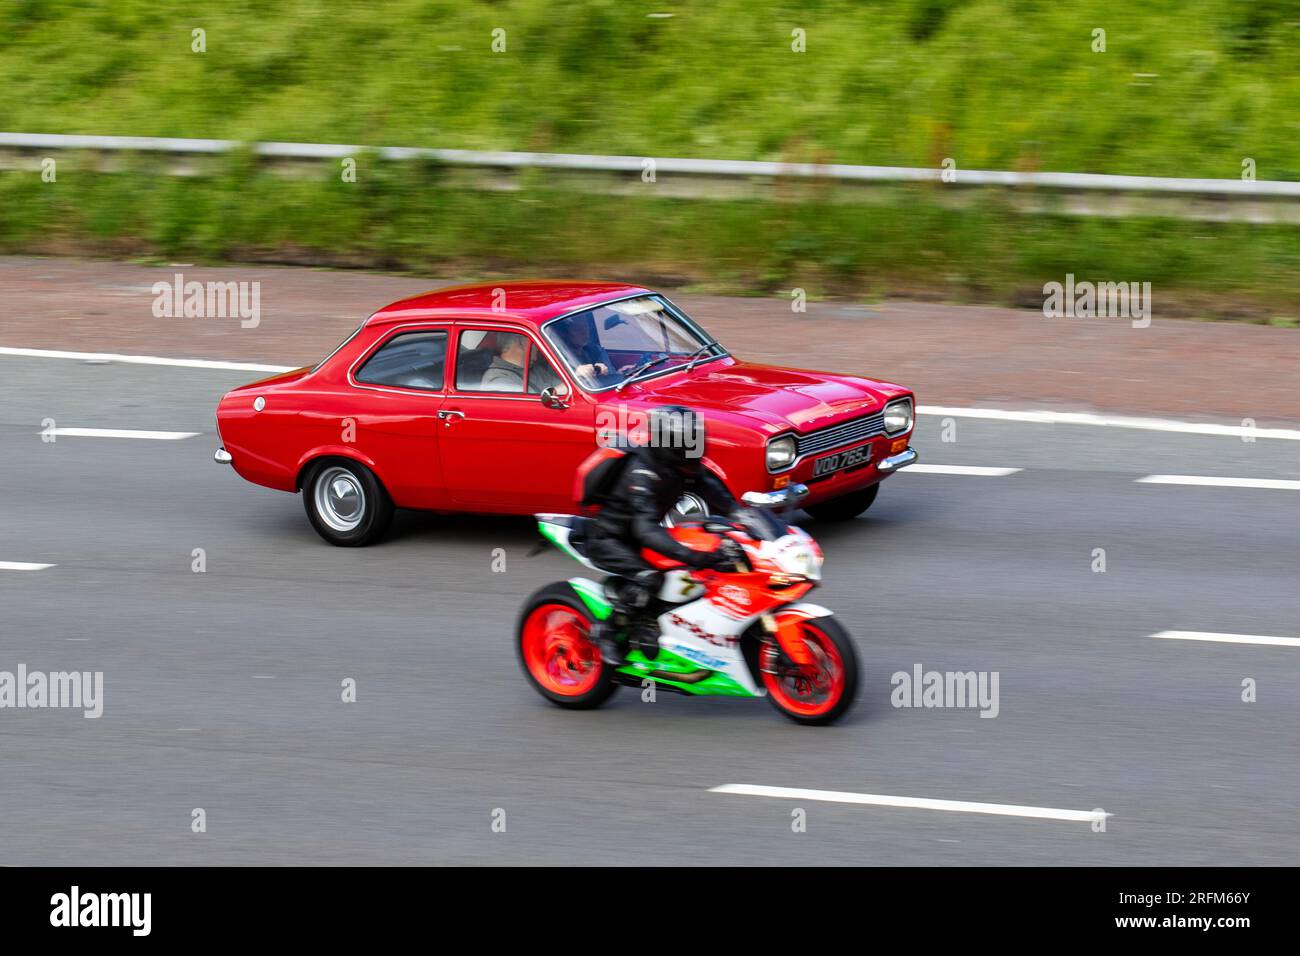 Honda CBR Motorcycle overtaking a 1970 70s seventies Red Ford Escort Lotus Petrol 1558 cc travelling at speed on the M6 motorway in Greater Manchester, UK Stock Photo